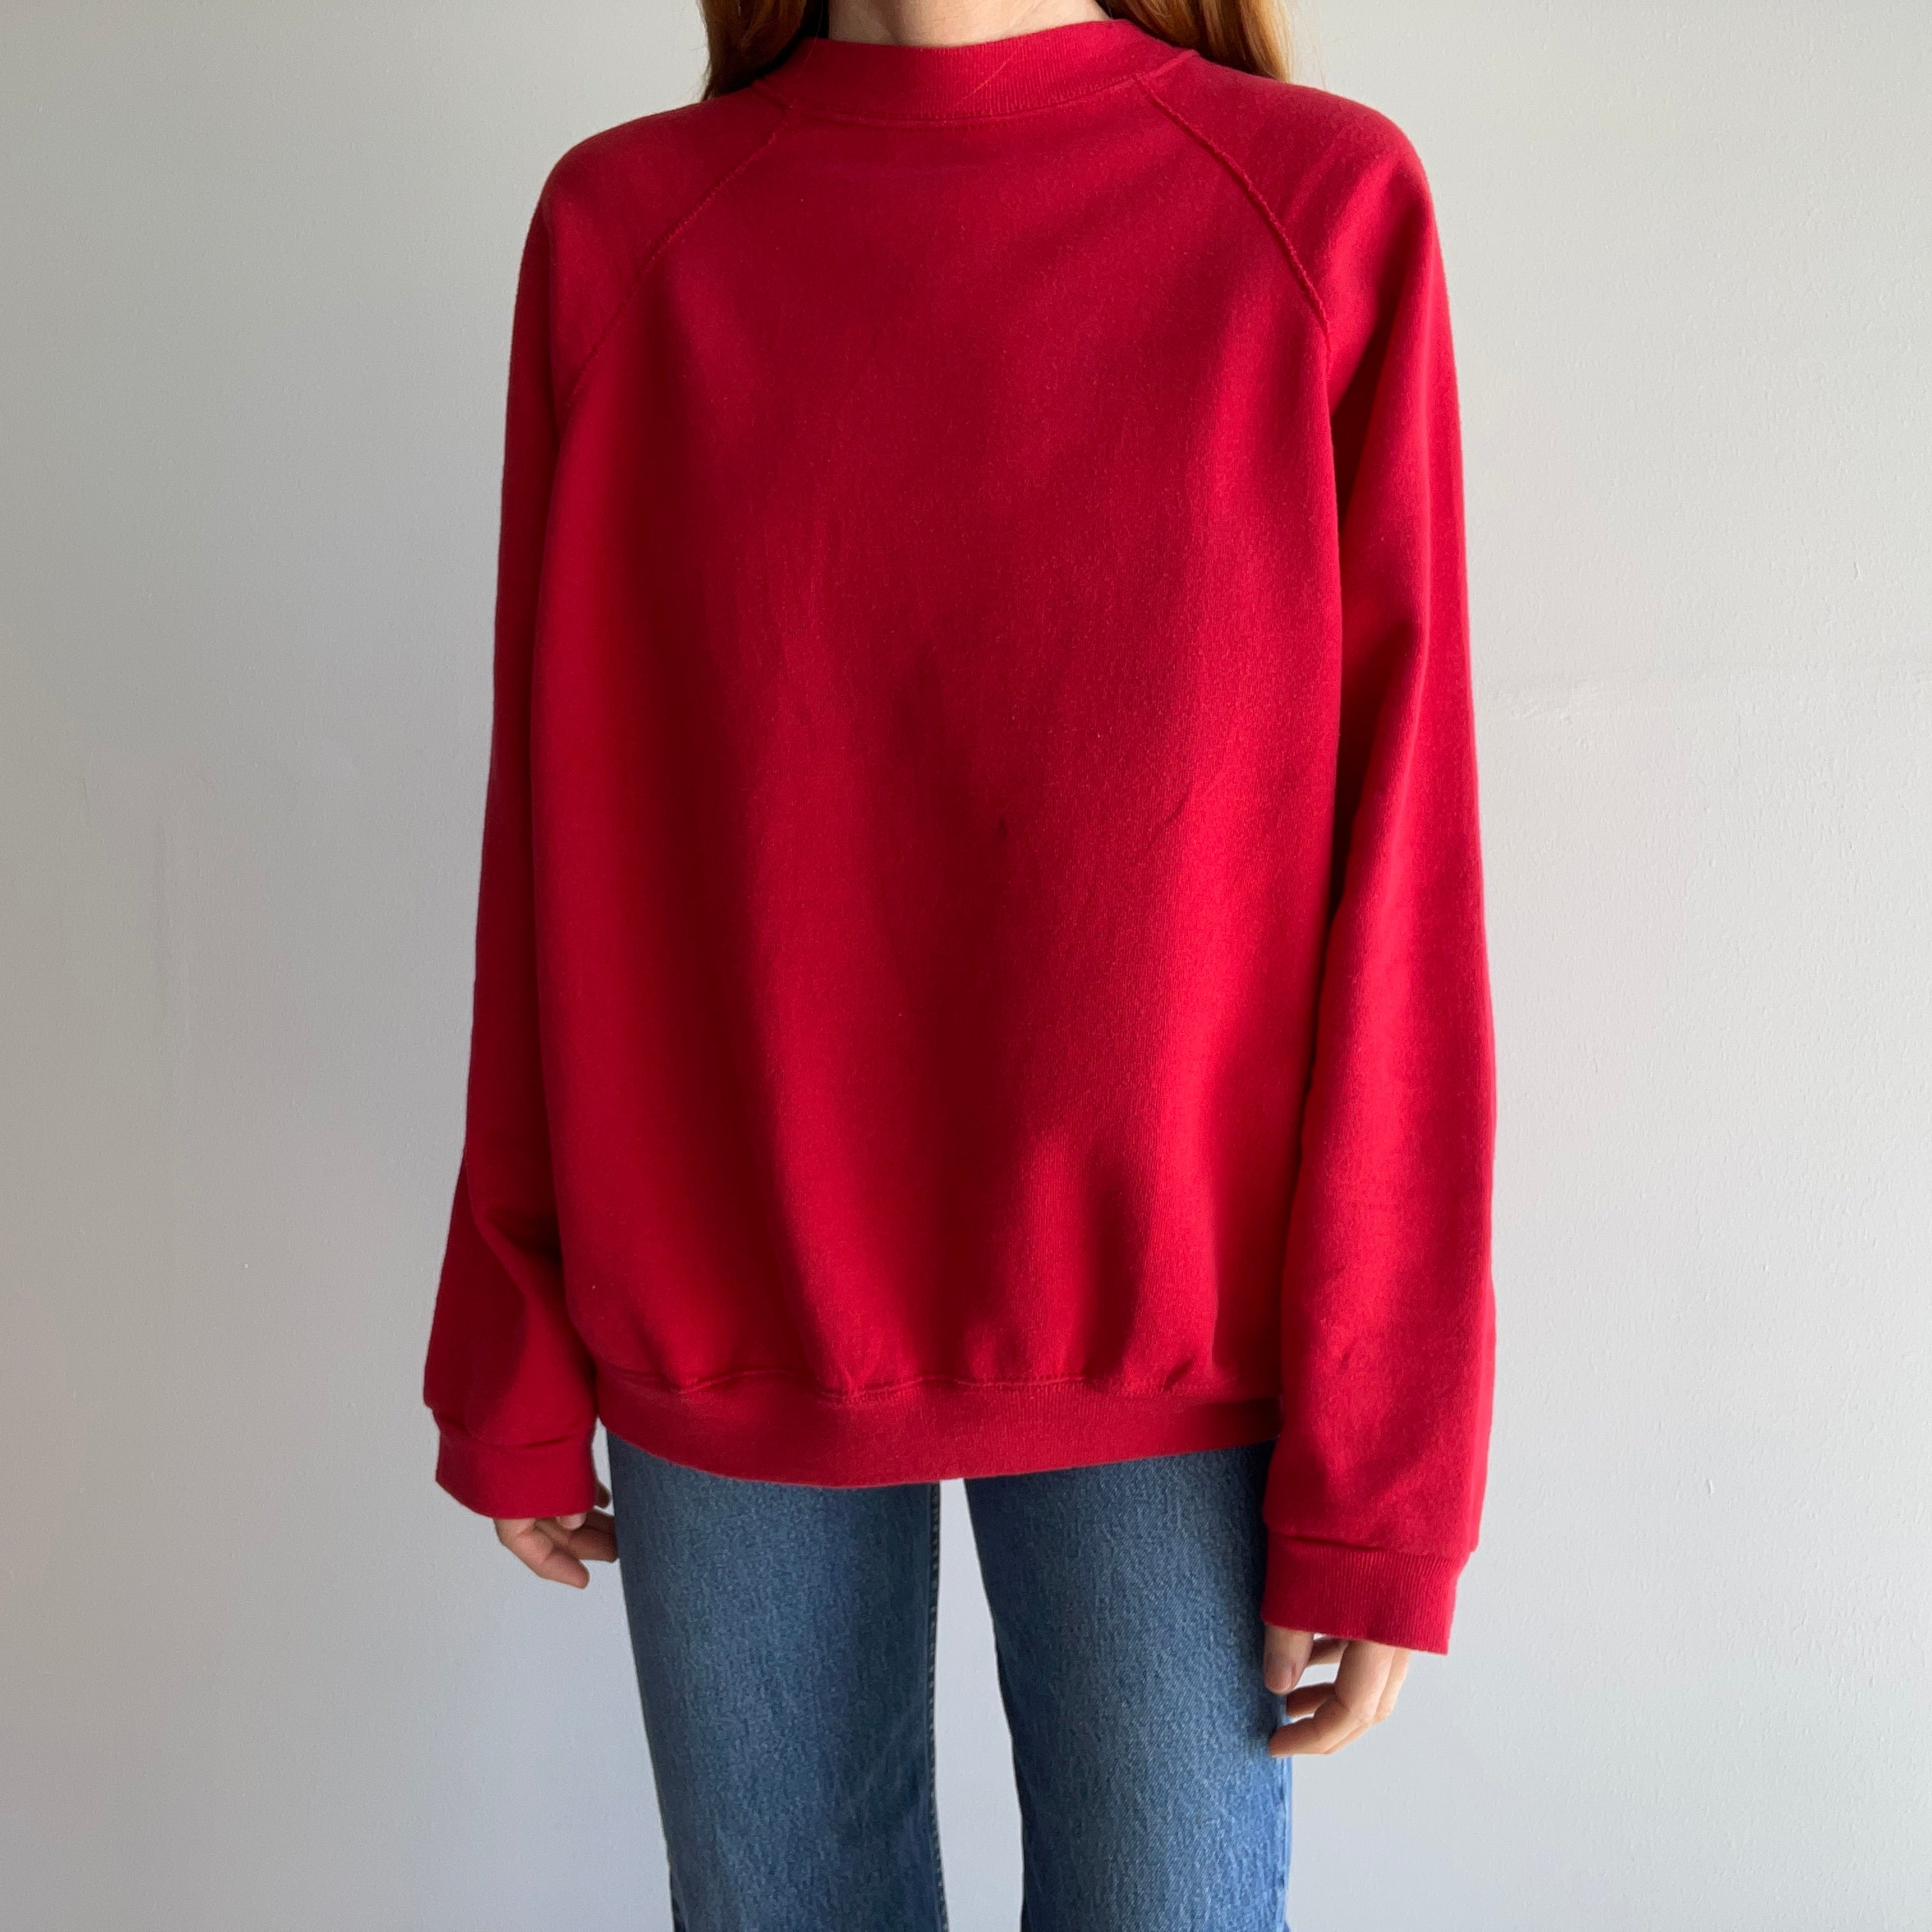 1980s Larger Red Raglan with Roomie Arms and Cuffs - Great Hang